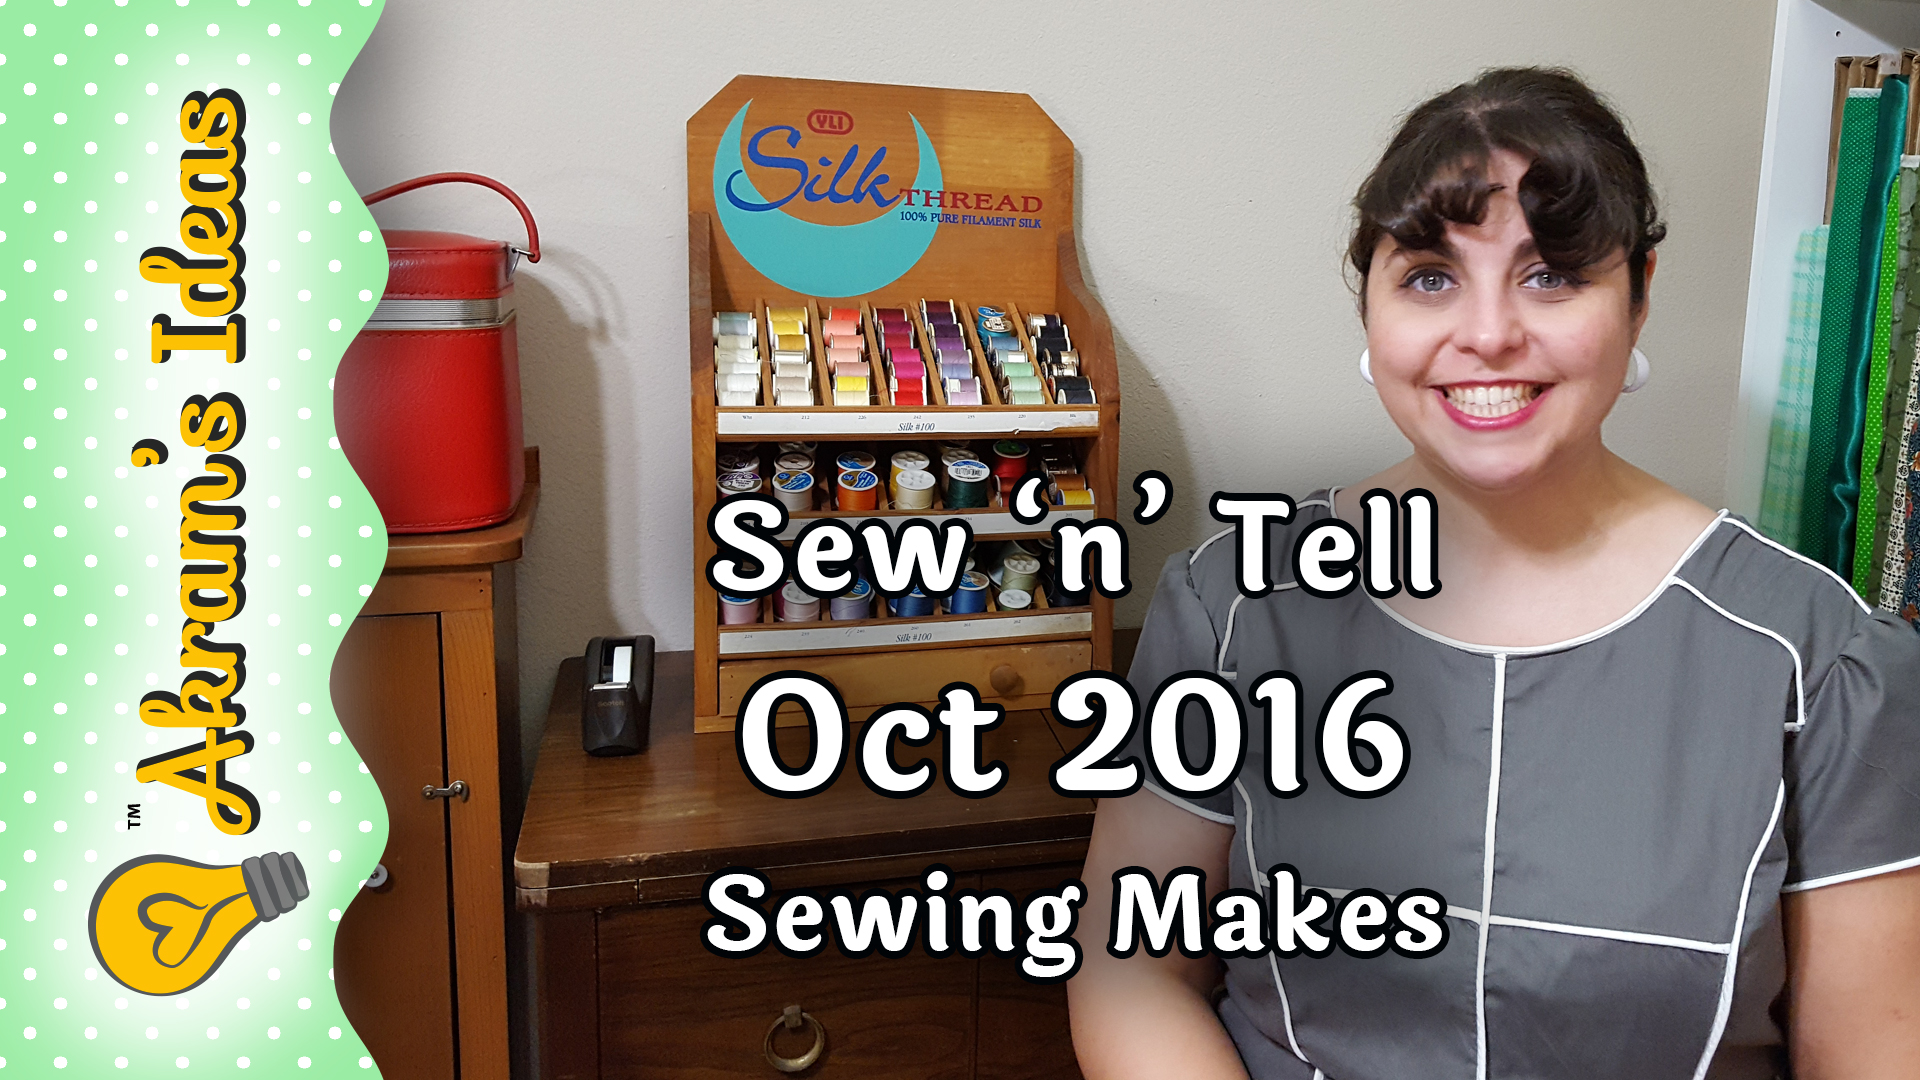 A Sew n’ Tell review of my latest makes for October 2016, which includes a skirt, blouse, and sweater.